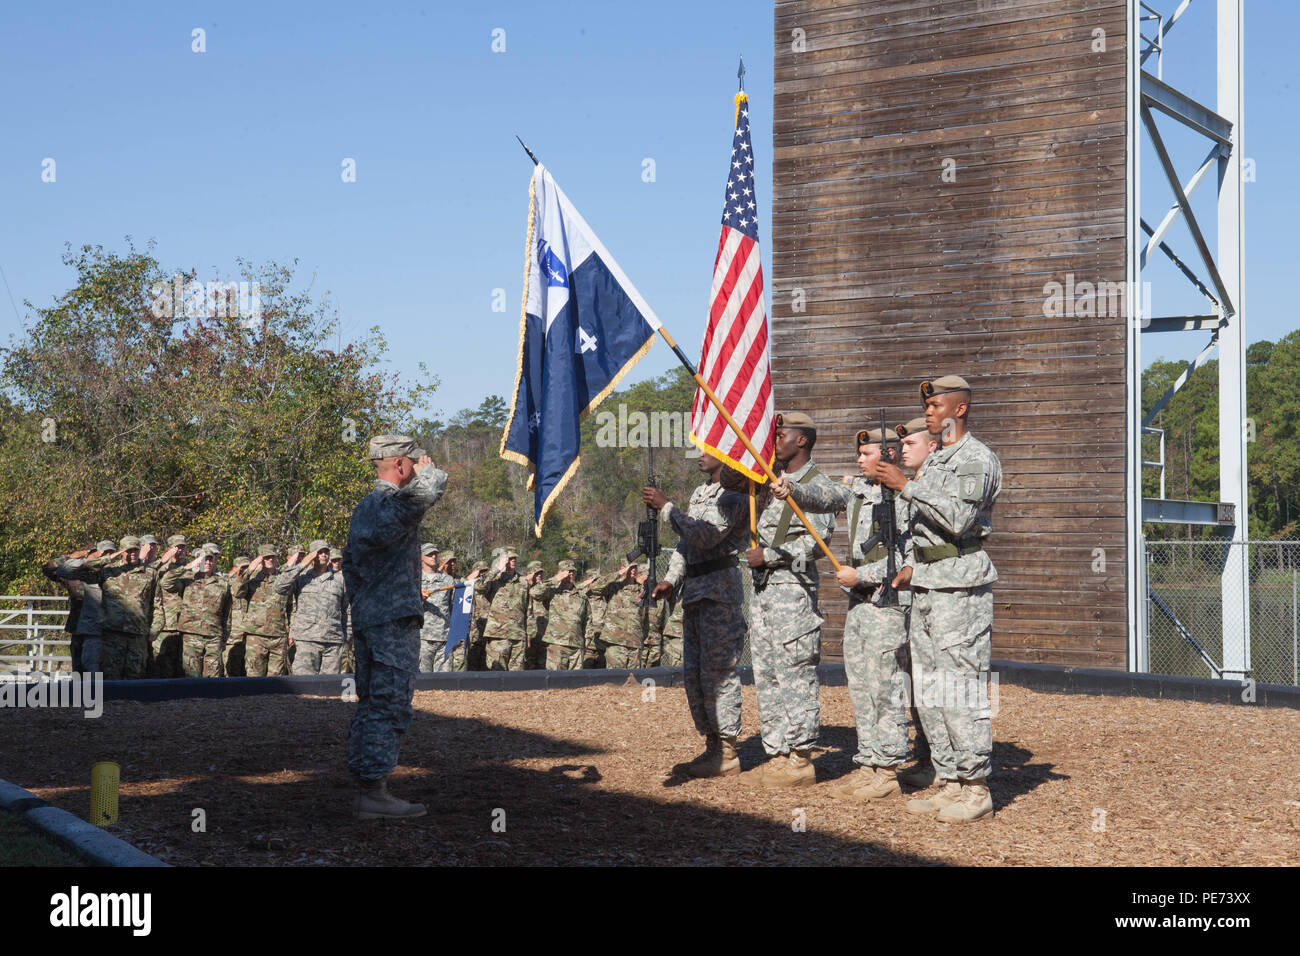 U.S. Soldiers salute the National Anthem during a Ranger Graduation that included the third female to graduate the school on Oct. 16, 2015, in Fort Benning, Ga. The United States Army Ranger School is an intense 61-day combat leadership course oriented toward small-unit tactics. (U.S. Army Photo by Spc. Jessica Hurst/ Released) Stock Photo